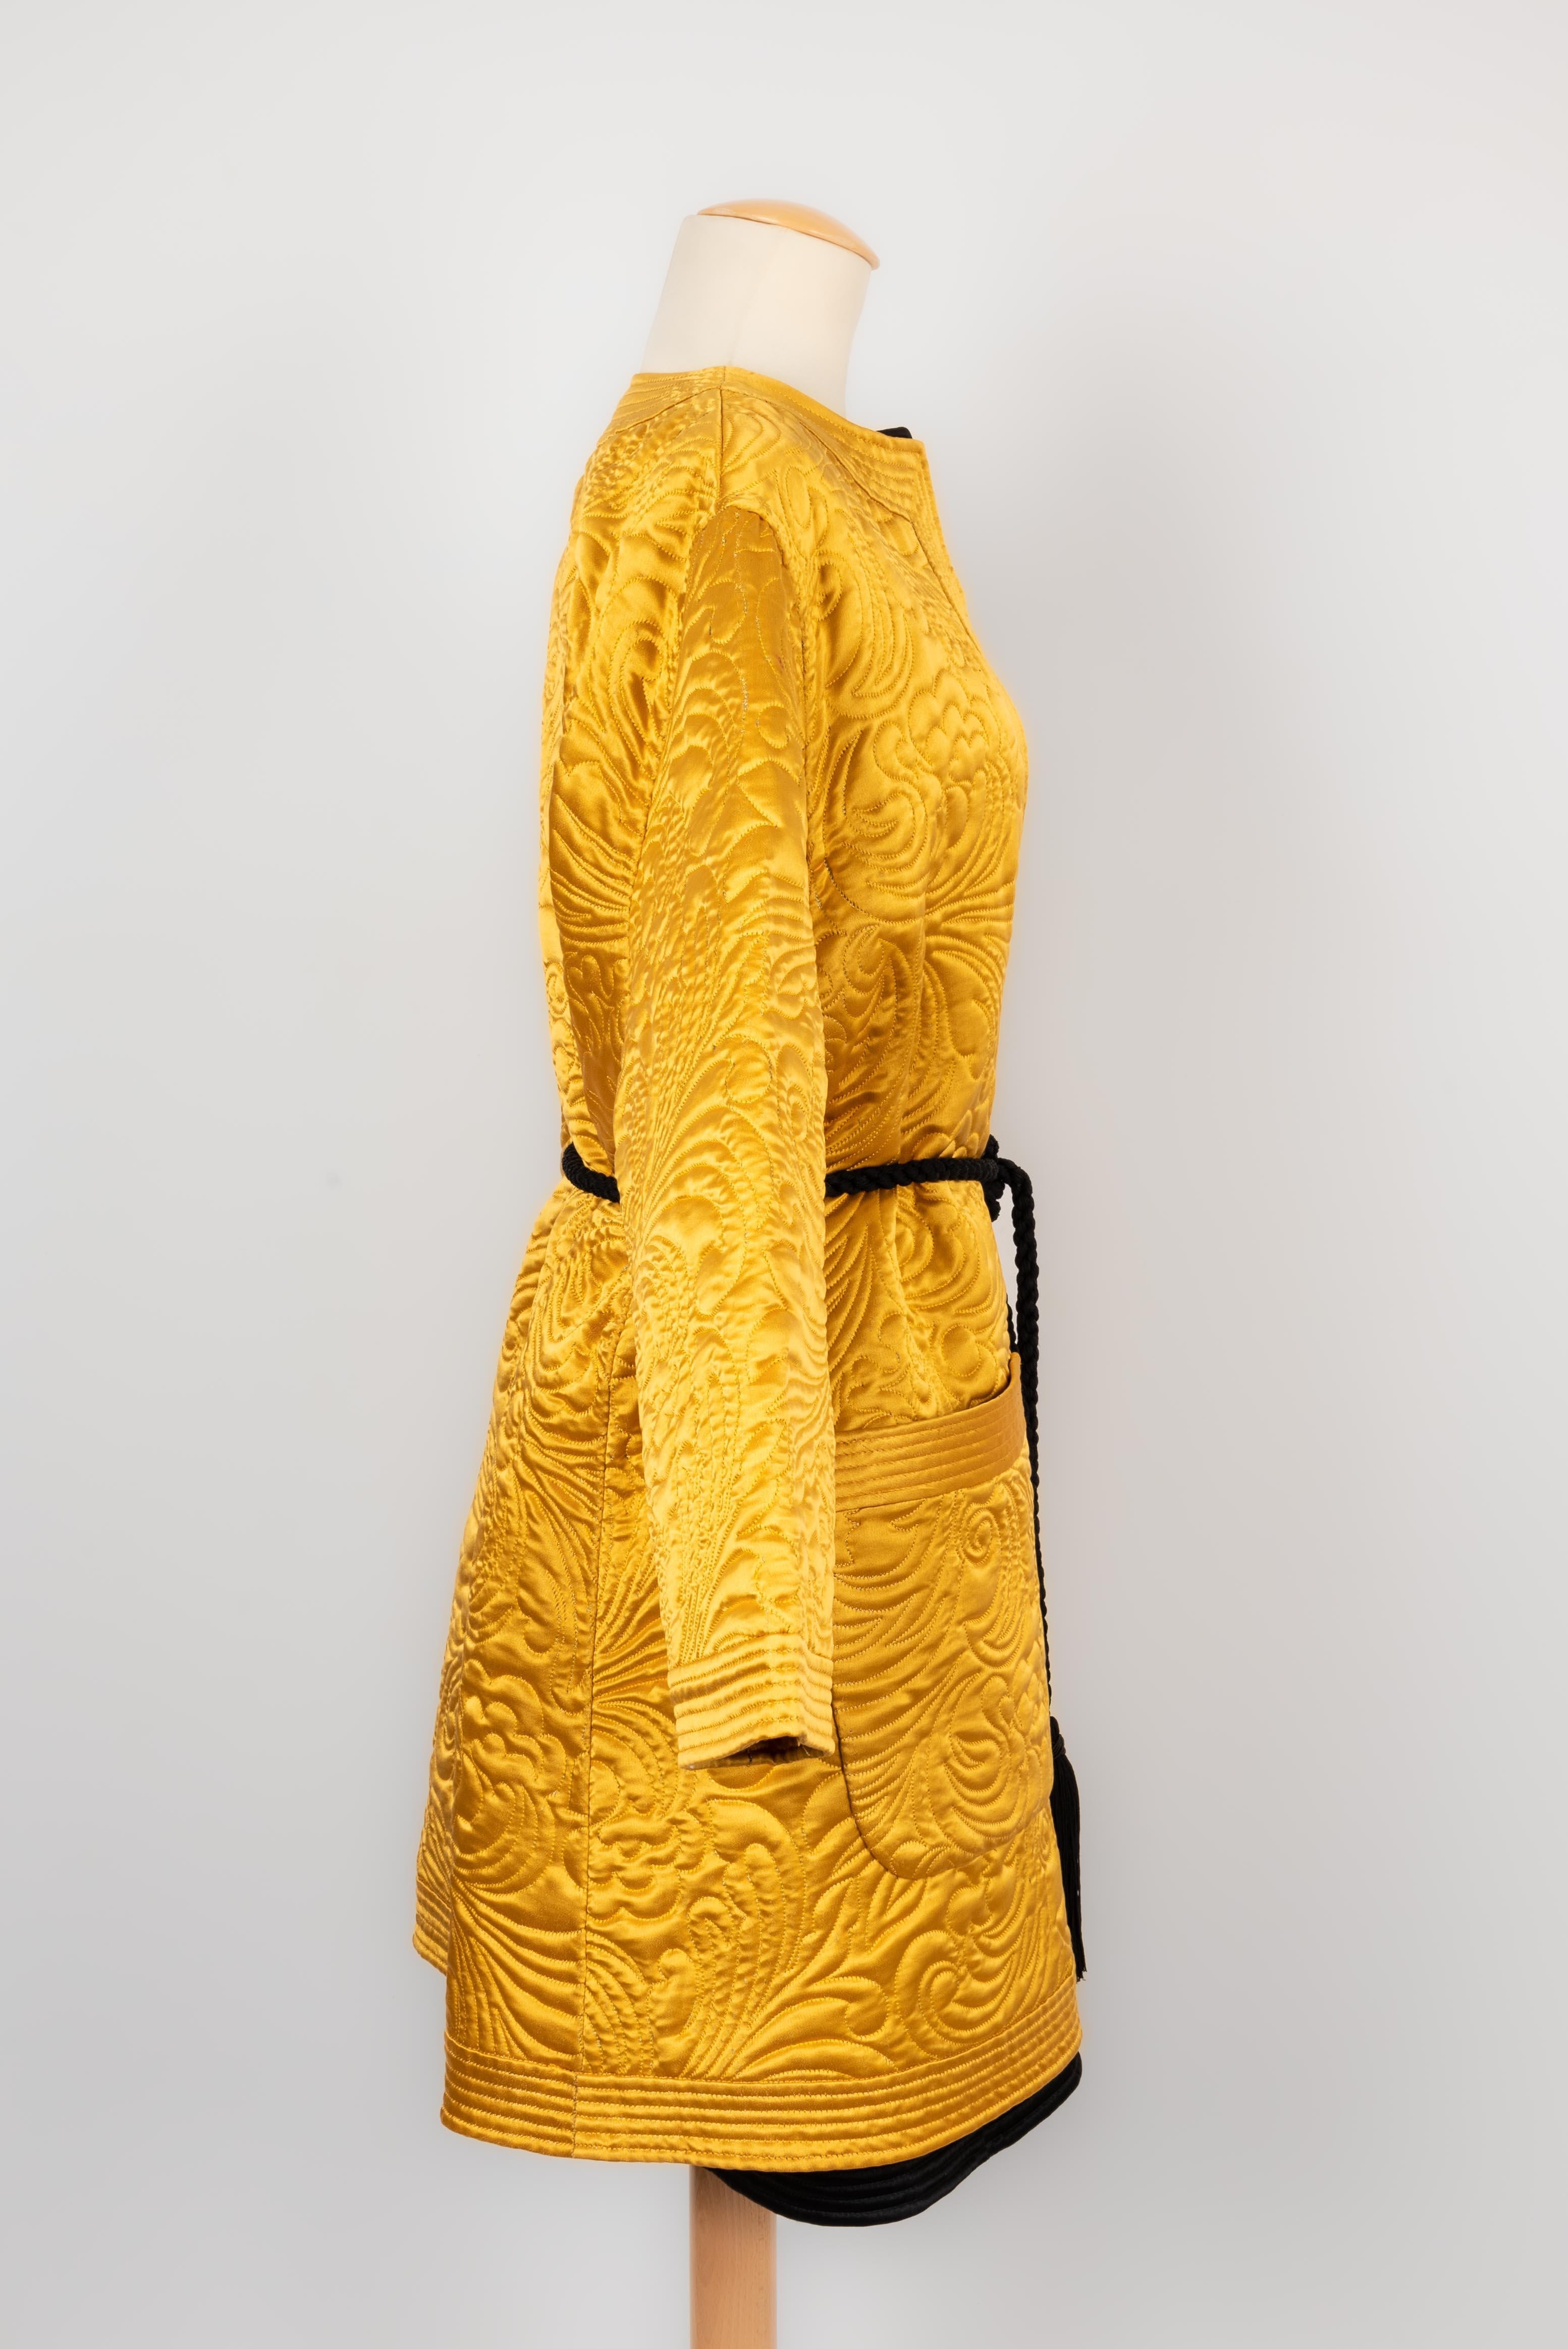 VALENTINO - Kimono-style double jackets in topstitched silk.  Haute Couture piece Fall-Winter 1990/91 collection. No size nor composition label, they fit a 40FR.

Condition:
Very good condition

Dimensions:
Yellow jacket: Shoulder width: 47 cm -